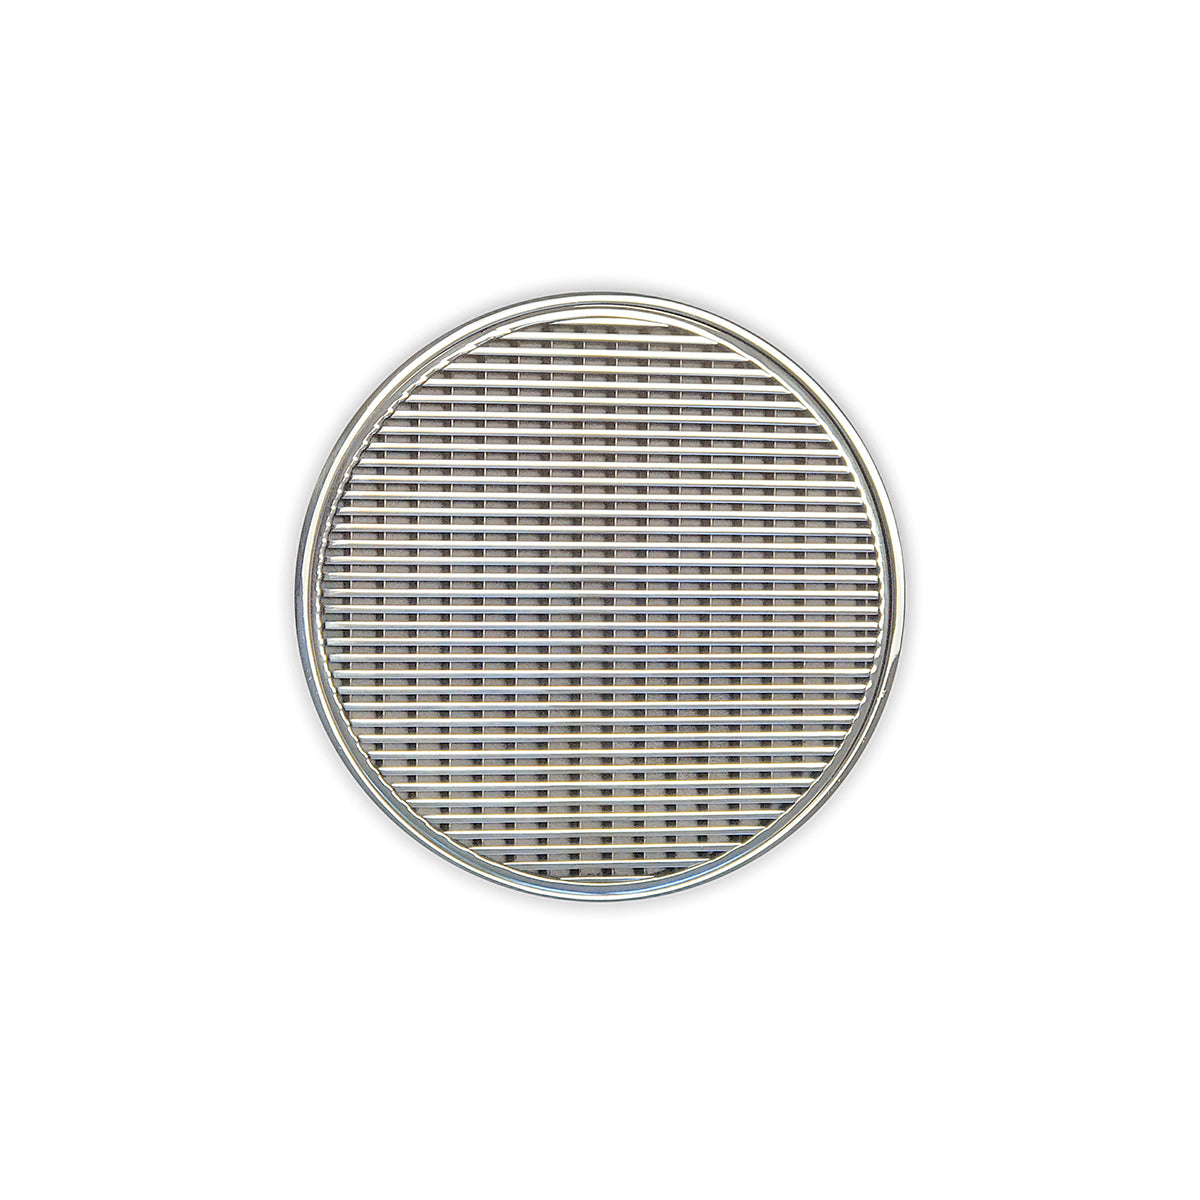 Infinity Drain 5" Round Strainer Premium Center Drain Kit with Wedge Wire Pattern Decorative Plate and 2" Throat for RWD 5